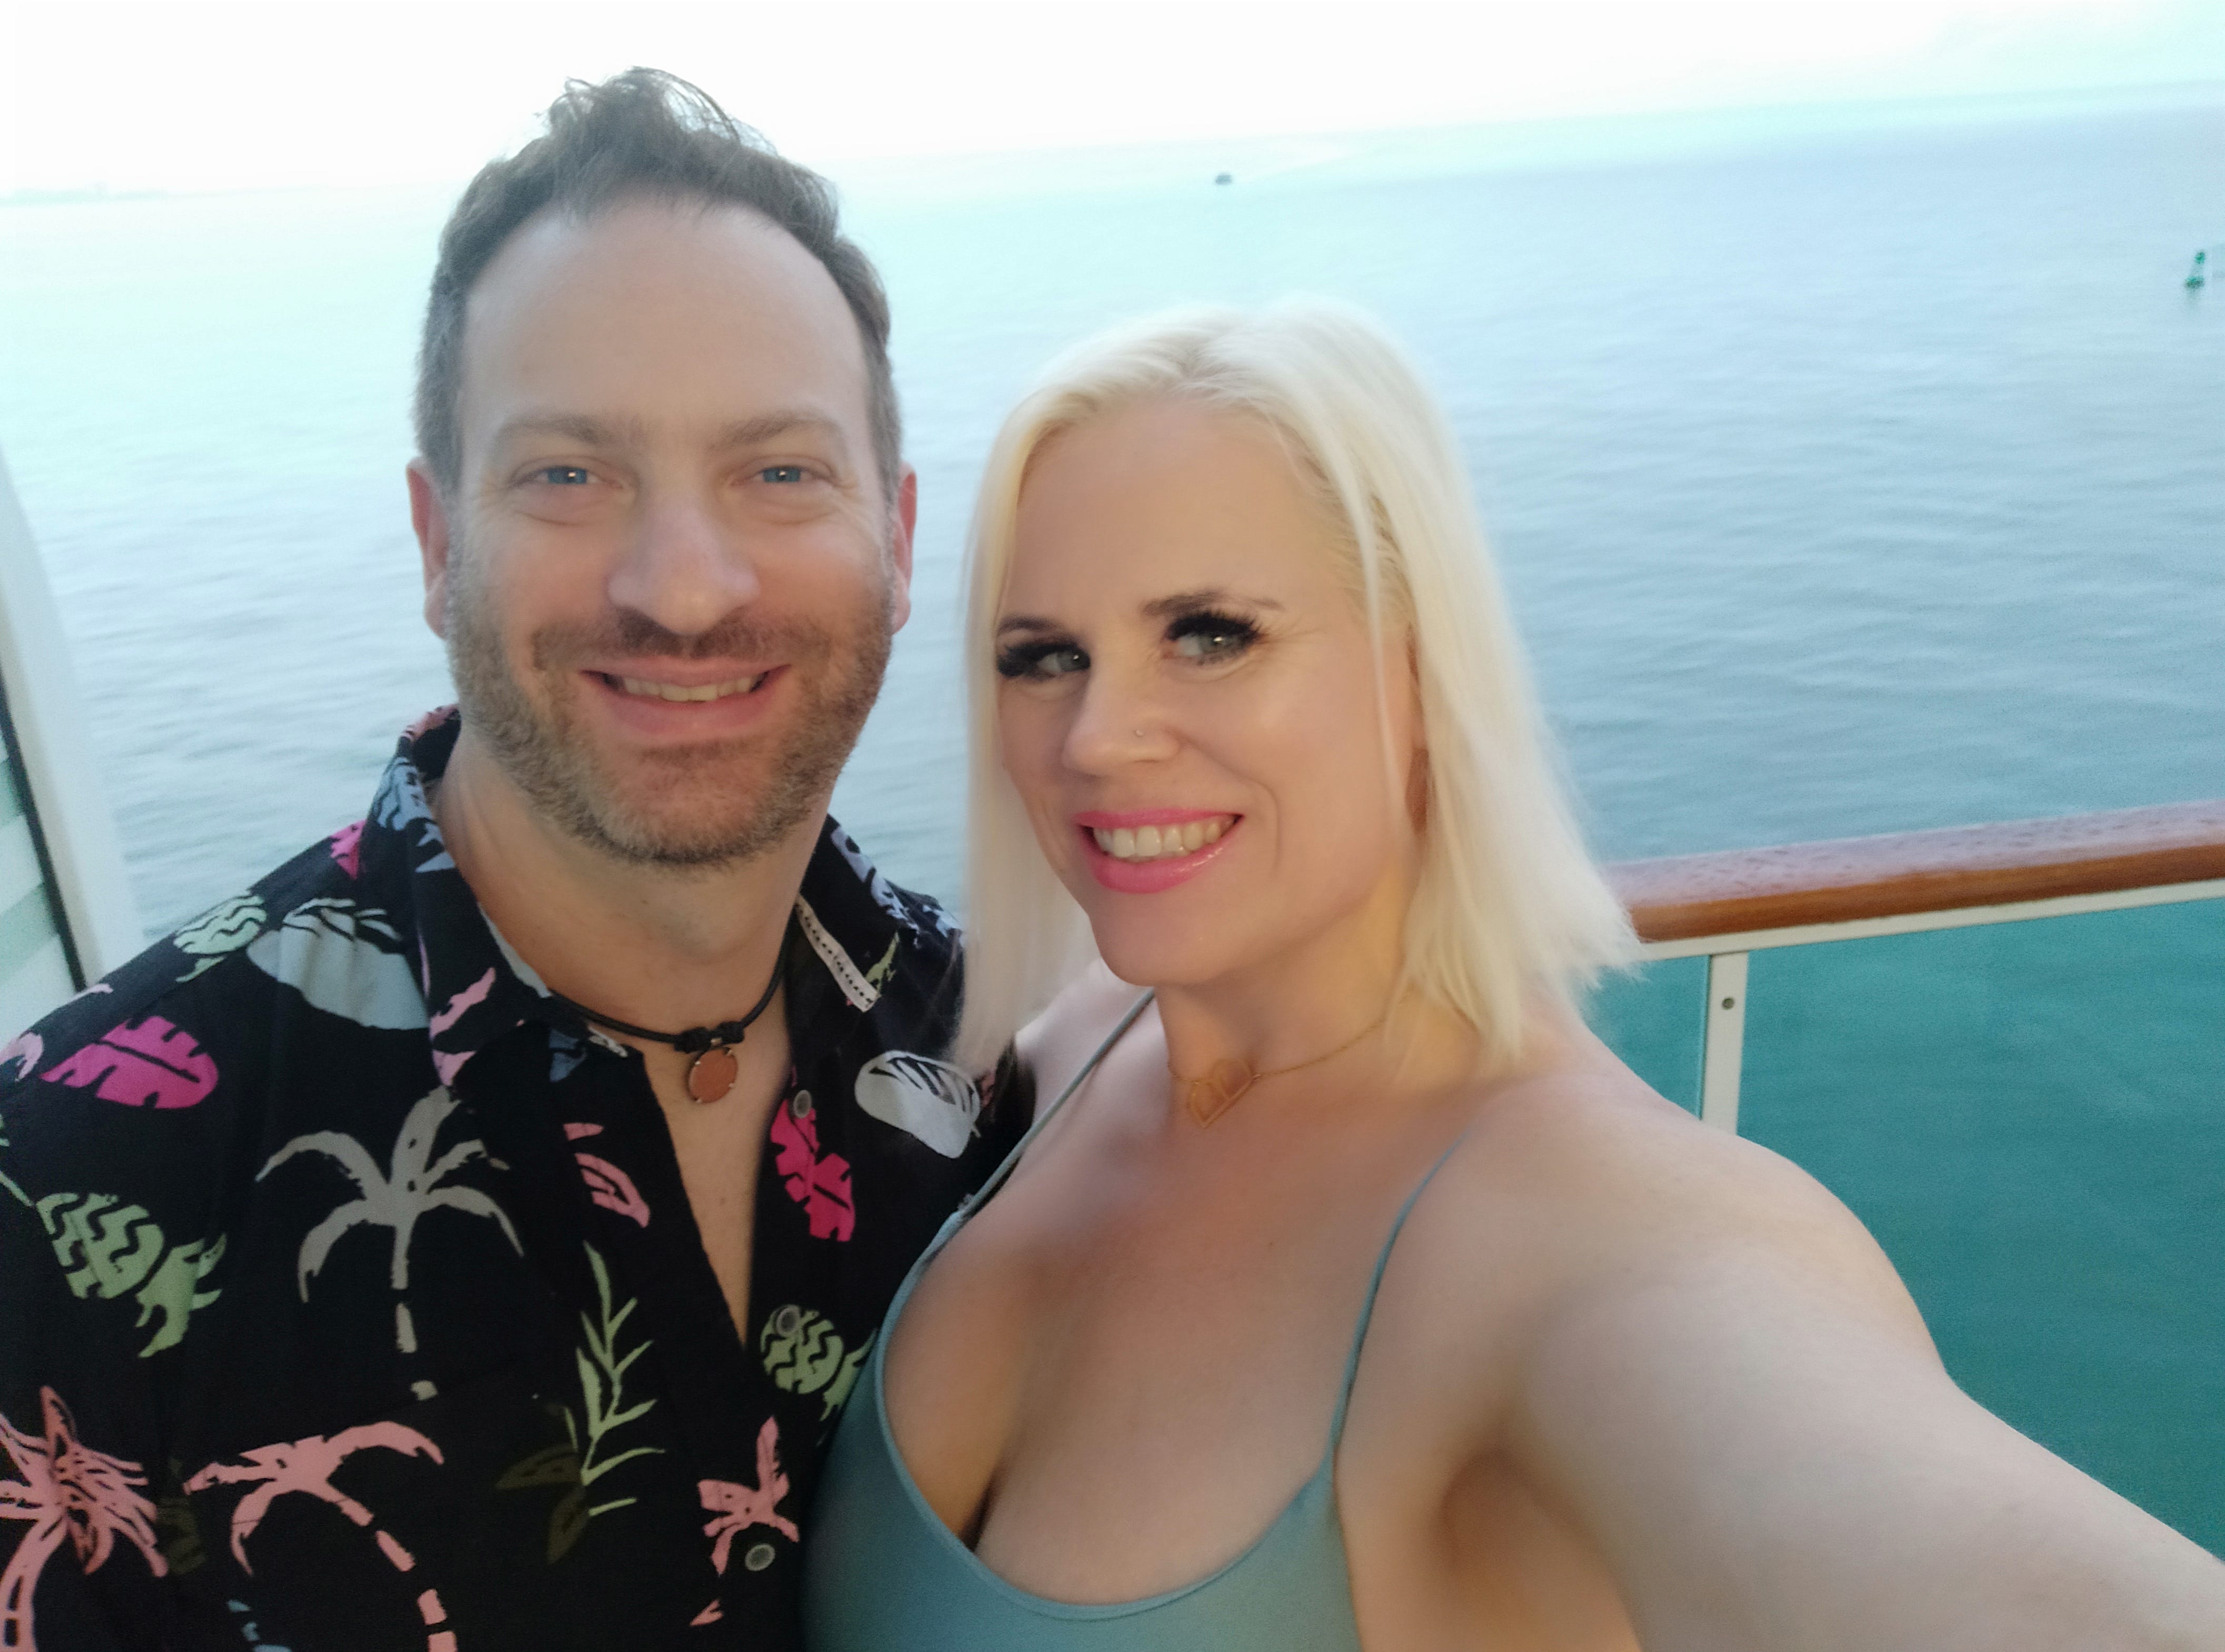 Naked Beach Sucking - Swingers 'lower their inhibitions' on cruise vacations